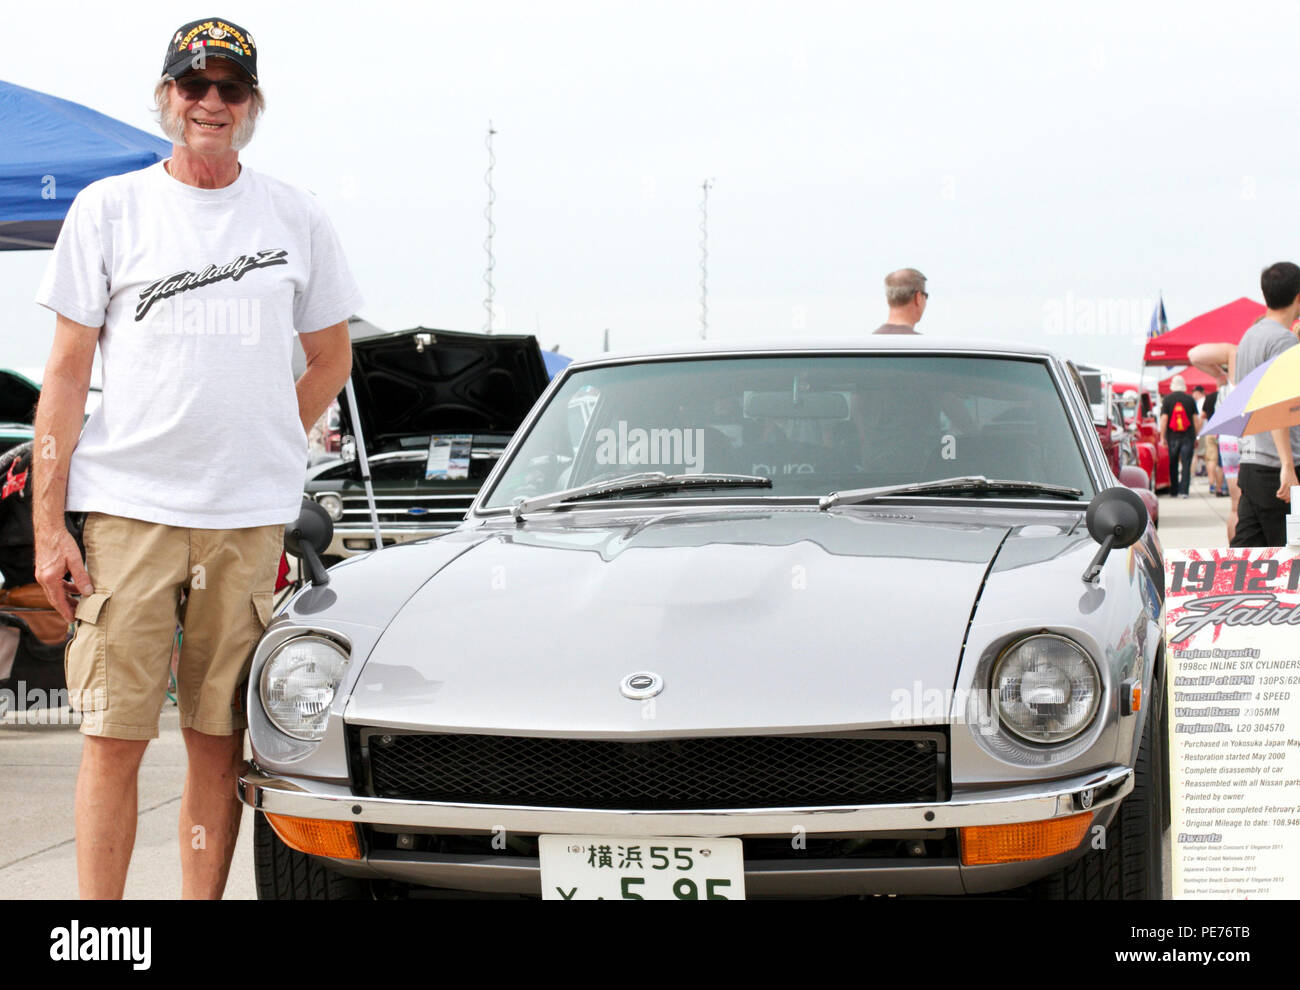 Joe Rotz, Vietnam veteran and car enthusiast, displays his 1972 Nissan Fairlady Z S30s at the 14th Annual Wings, Wheels, Rotors and Expo at Joint Forces Training Base Los Alamitos, Calif., Oct. 25, 2015. Rotz, from Stanton, Calif., served in the U.S. Navy from 1968 to 1976 as a Gunner's Mate (Missiles). Rotz purchased the car while on duty in Yokosuka, Japan, in 1974. The Wings, Wheels, Rotors and Expo, produced by the Los Alamitos Area Chamber of Commerce, features hundreds of hot rods and exotic cars, helicopters, airplanes and vintage warplanes on display combined with local vendors, food a Stock Photo